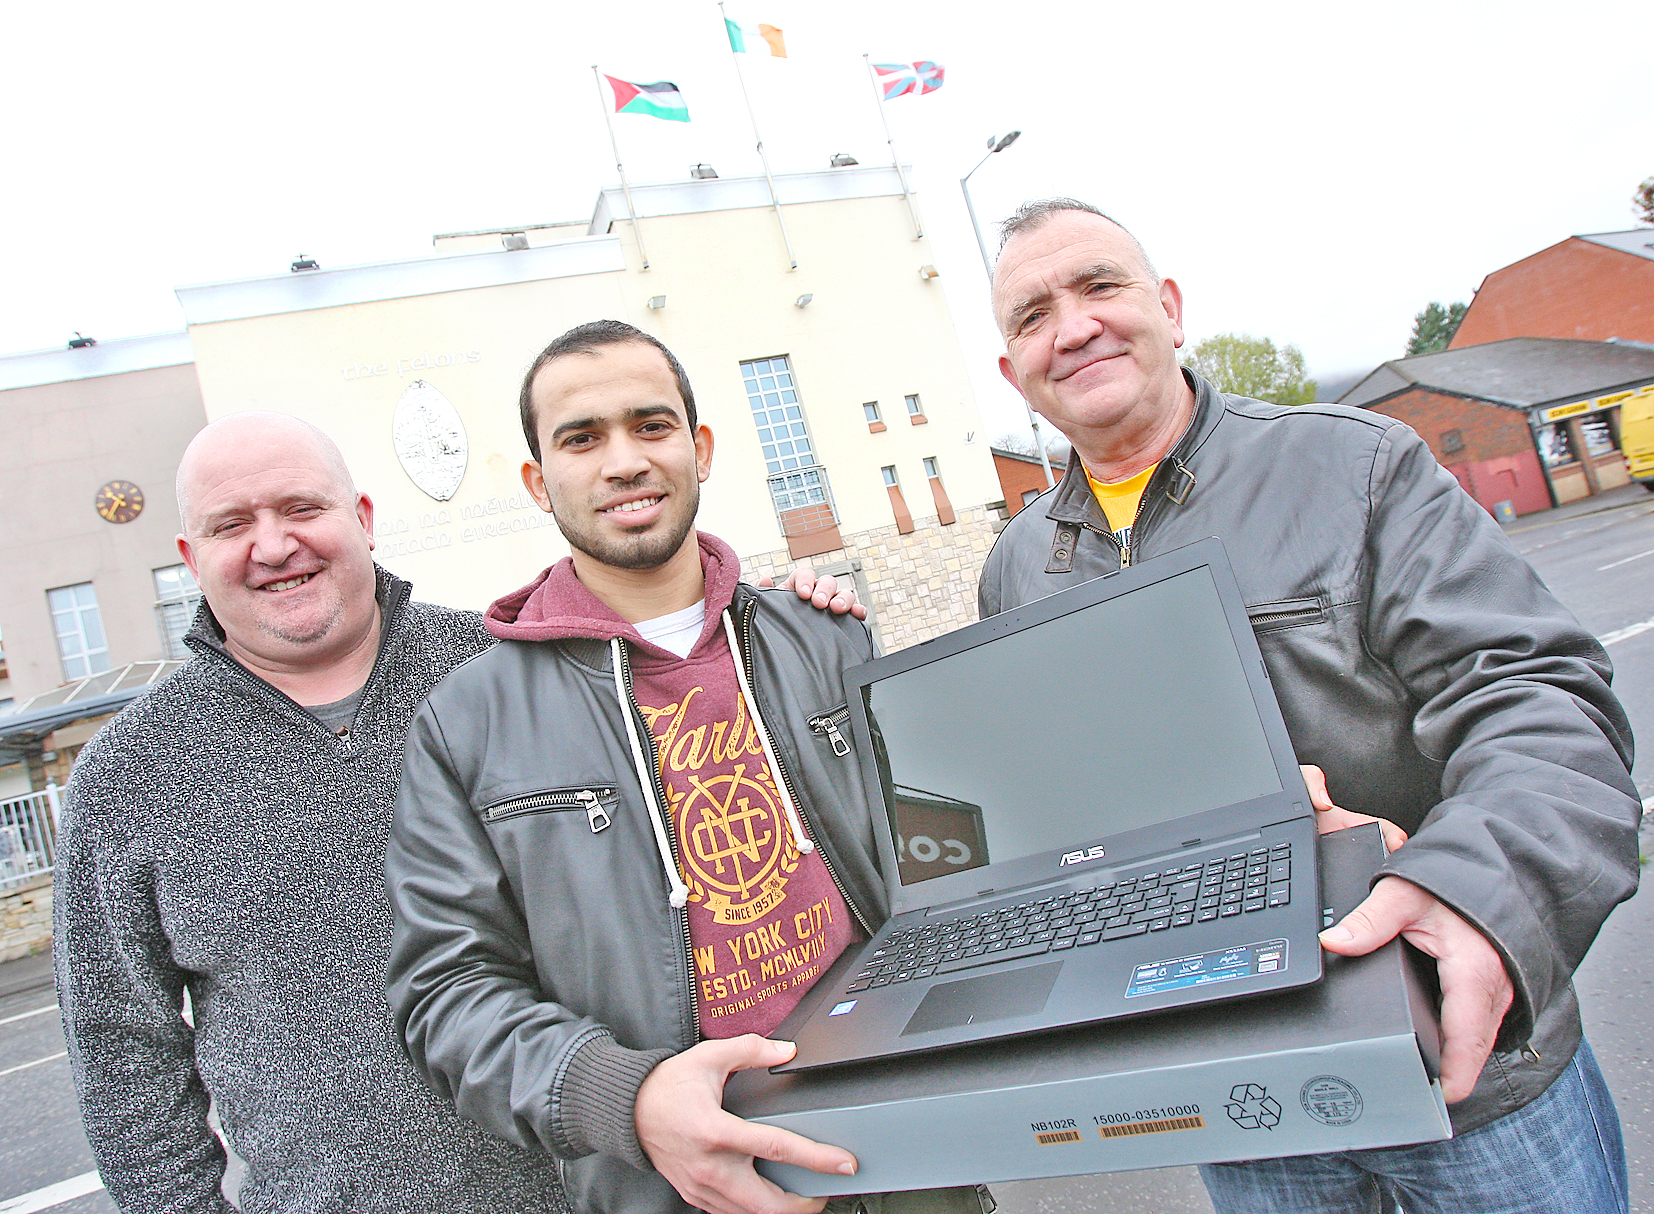 Gerry Scullion of the Felons presents Mustafa Afana from Palestine with a laptop for use in his studies at Queen’s. Looking on is local photographer John Mallon